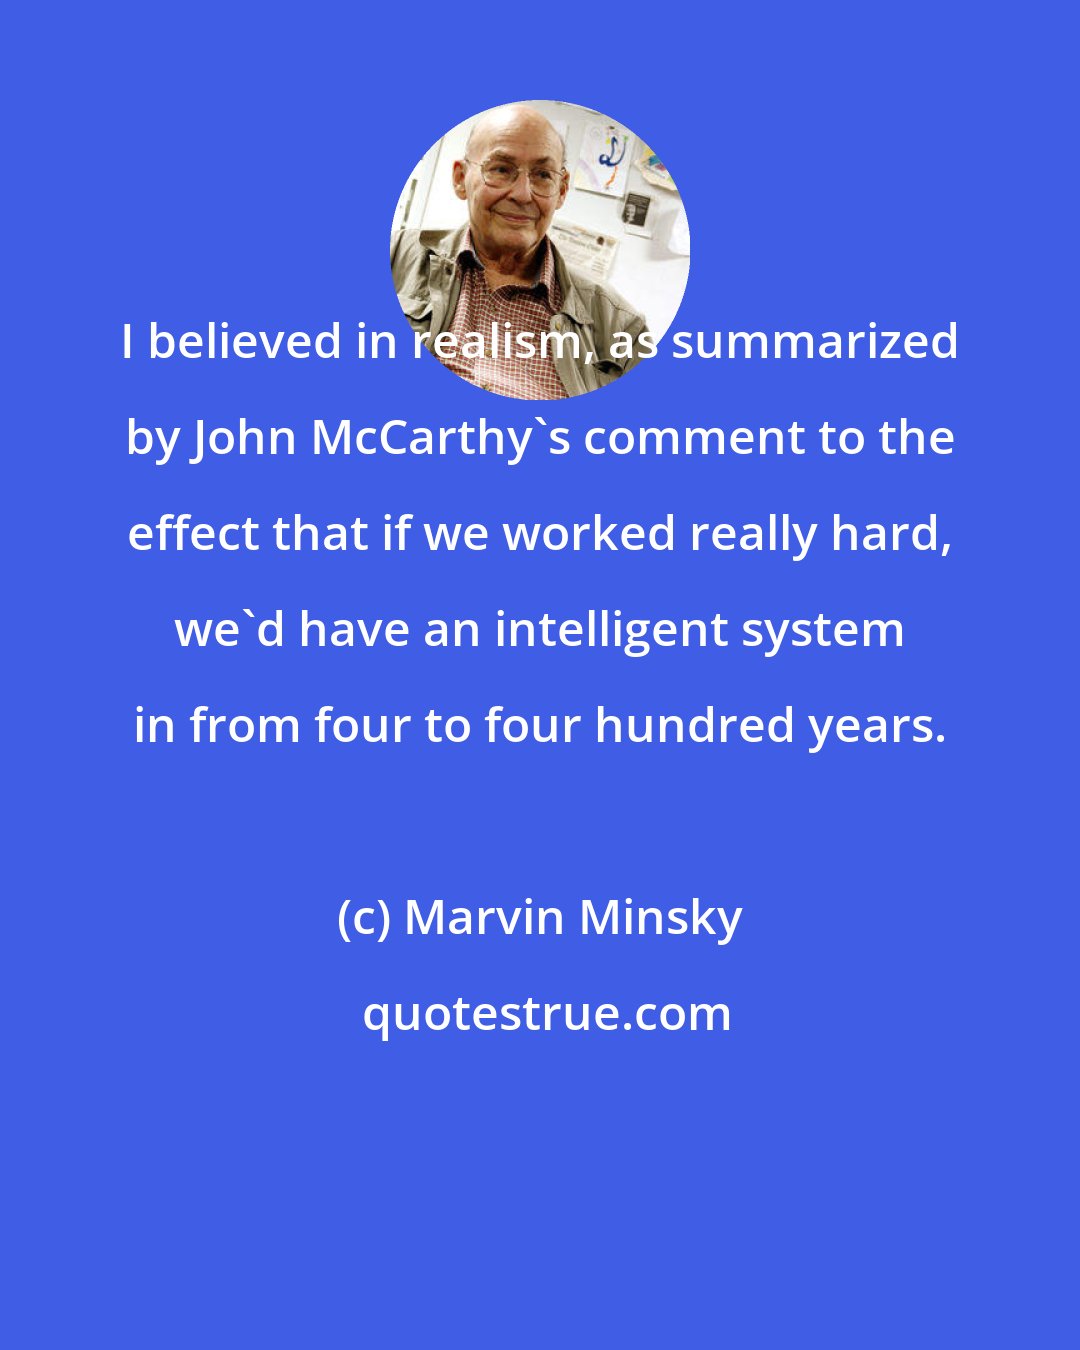 Marvin Minsky: I believed in realism, as summarized by John McCarthy's comment to the effect that if we worked really hard, we'd have an intelligent system in from four to four hundred years.